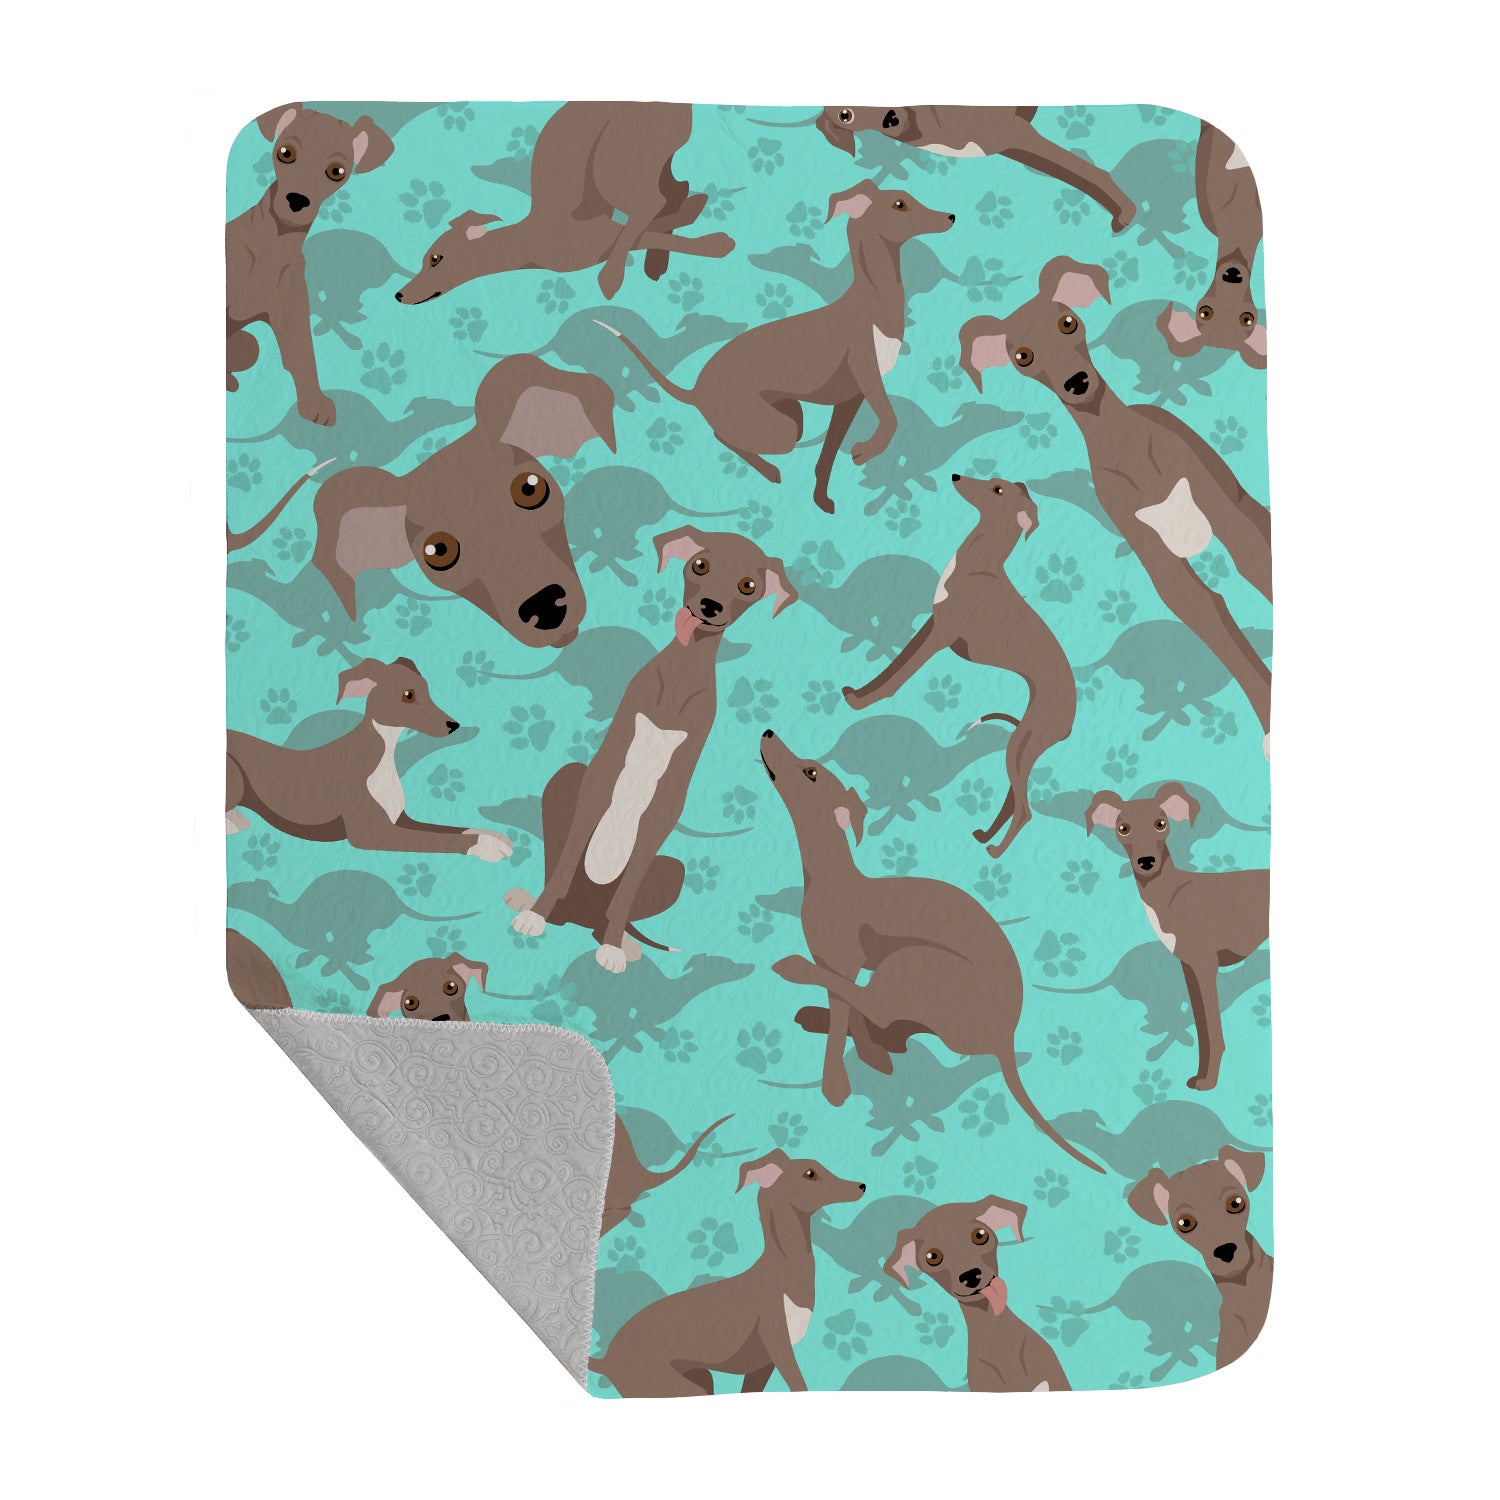 Buy this Fawn Italian Greyhound Quilted Blanket 50x60